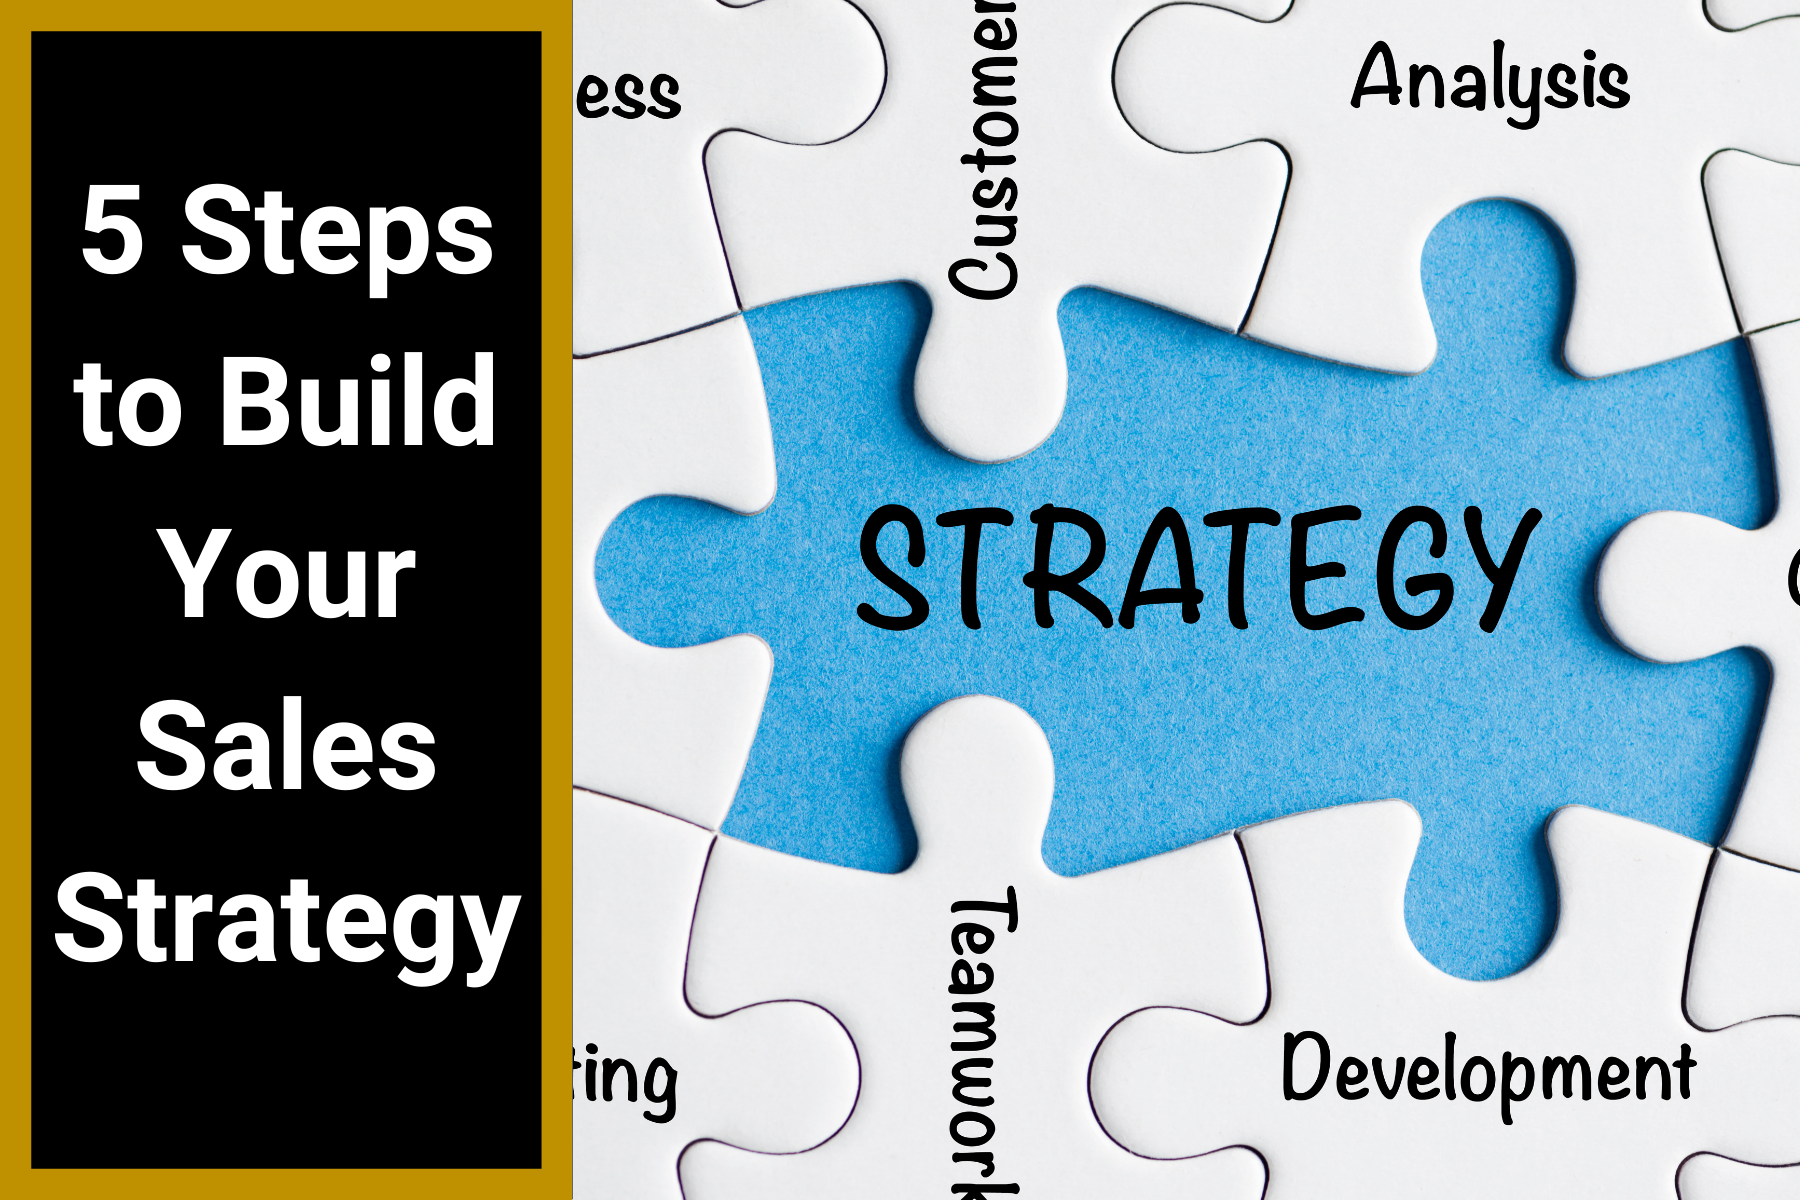 5 Steps to Build Your Sales Strategy